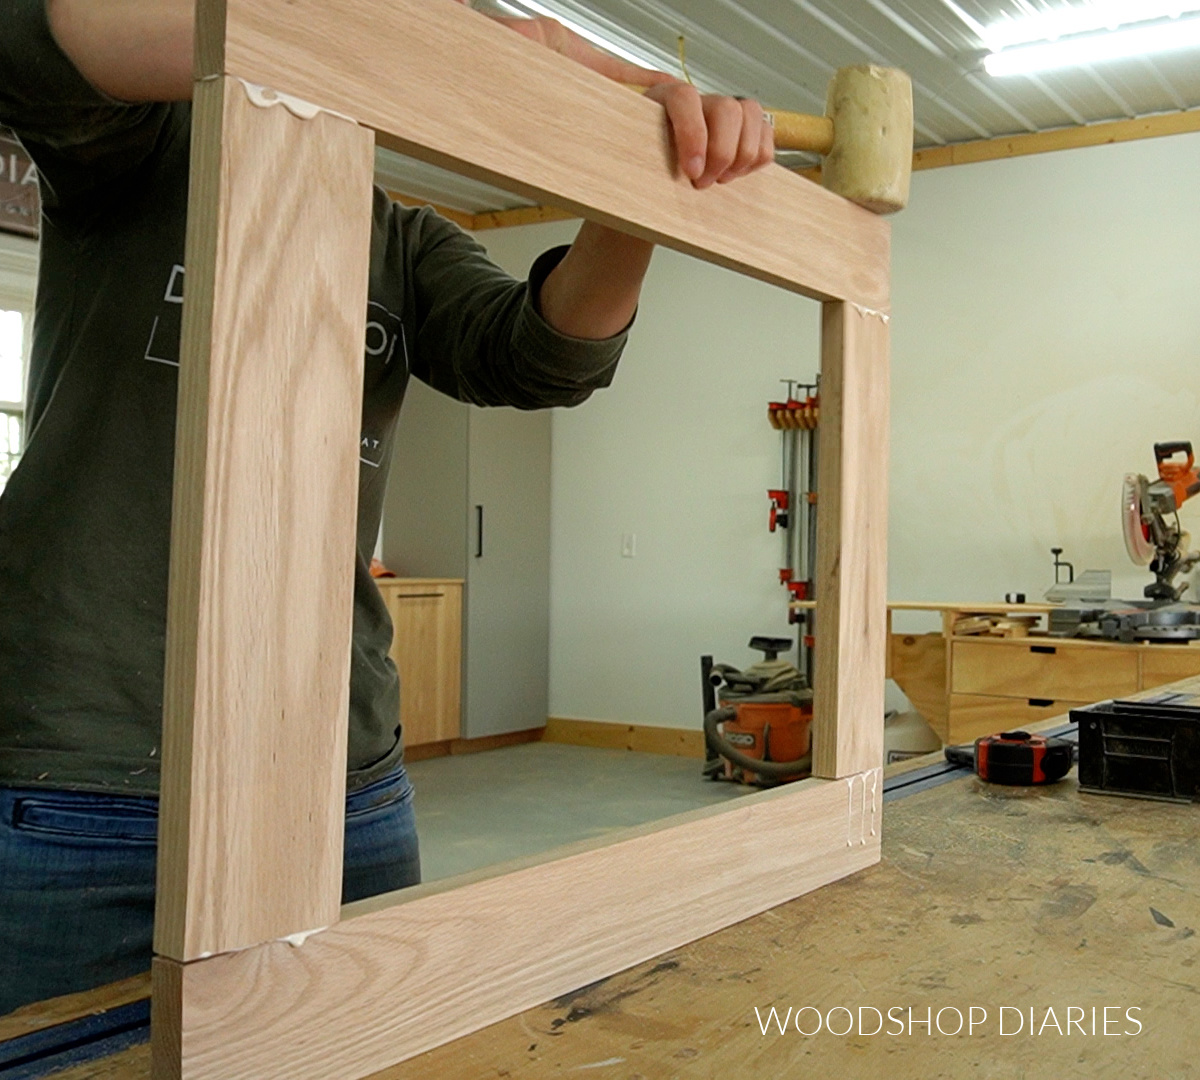 Using a rubber mallet to assemble door frame using dowels on workbench